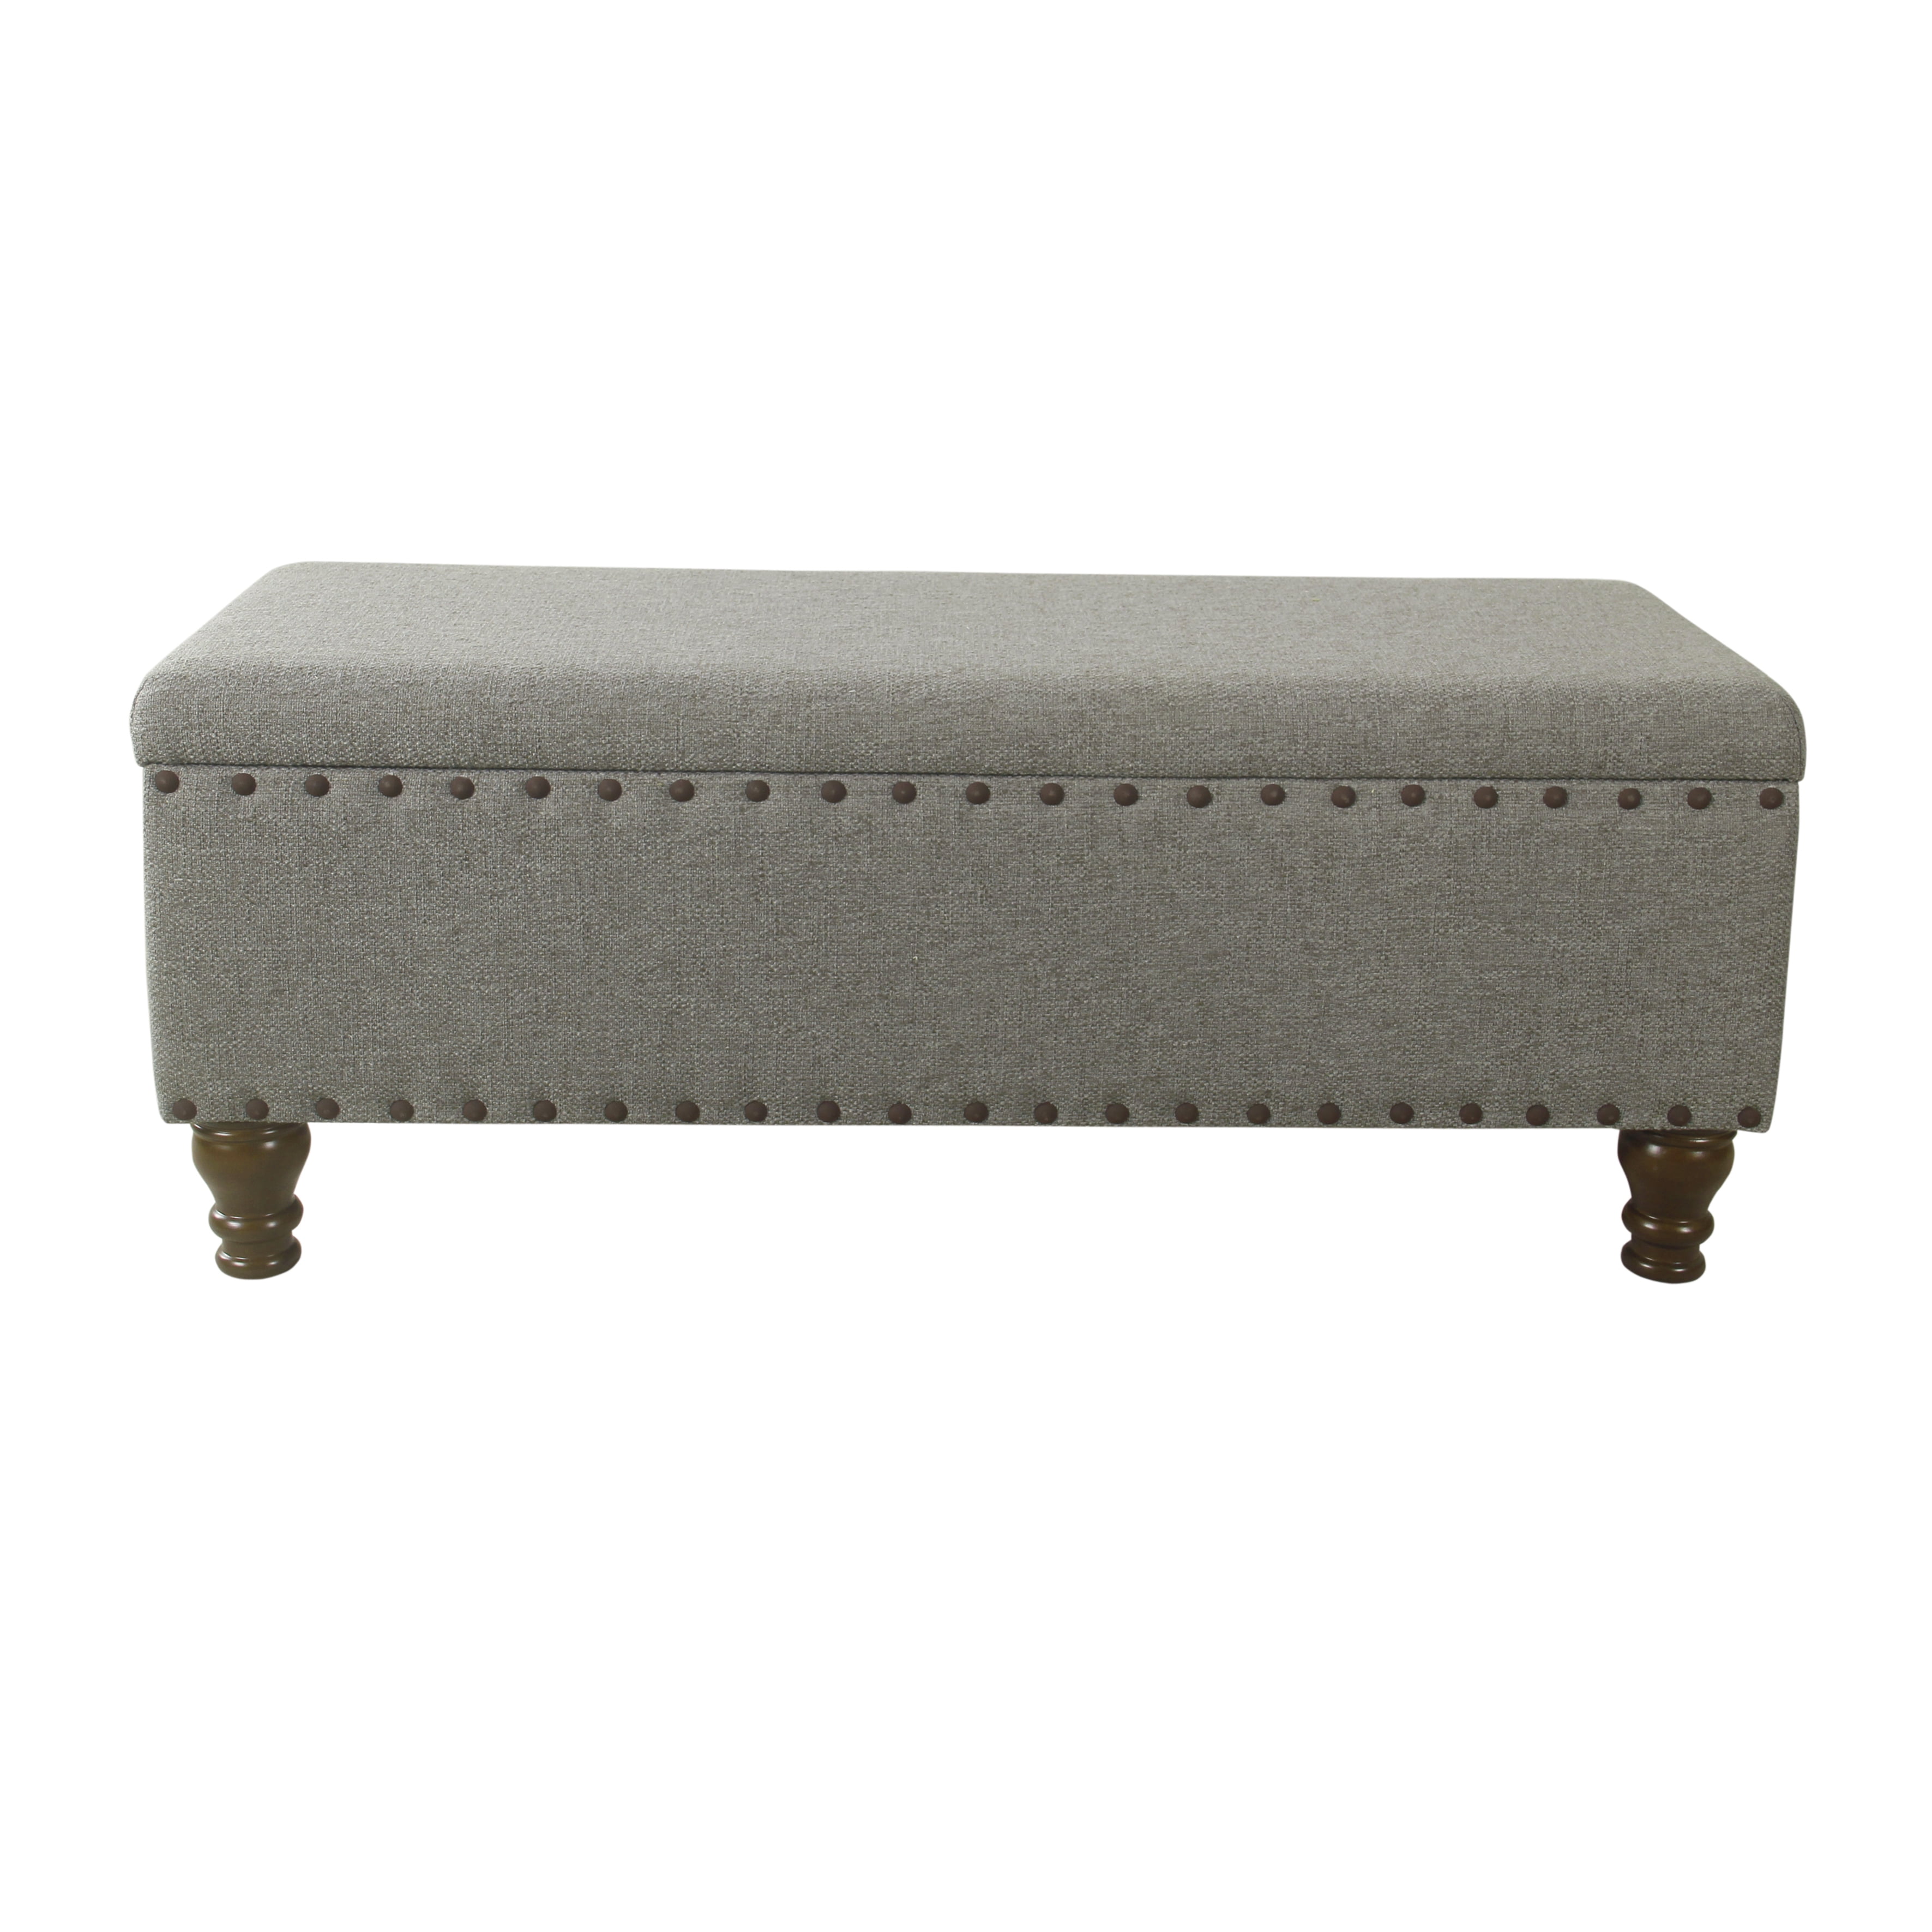 Details about   Linon Isabelle Linen Tufted Bench Multiple Sizes and Colors 